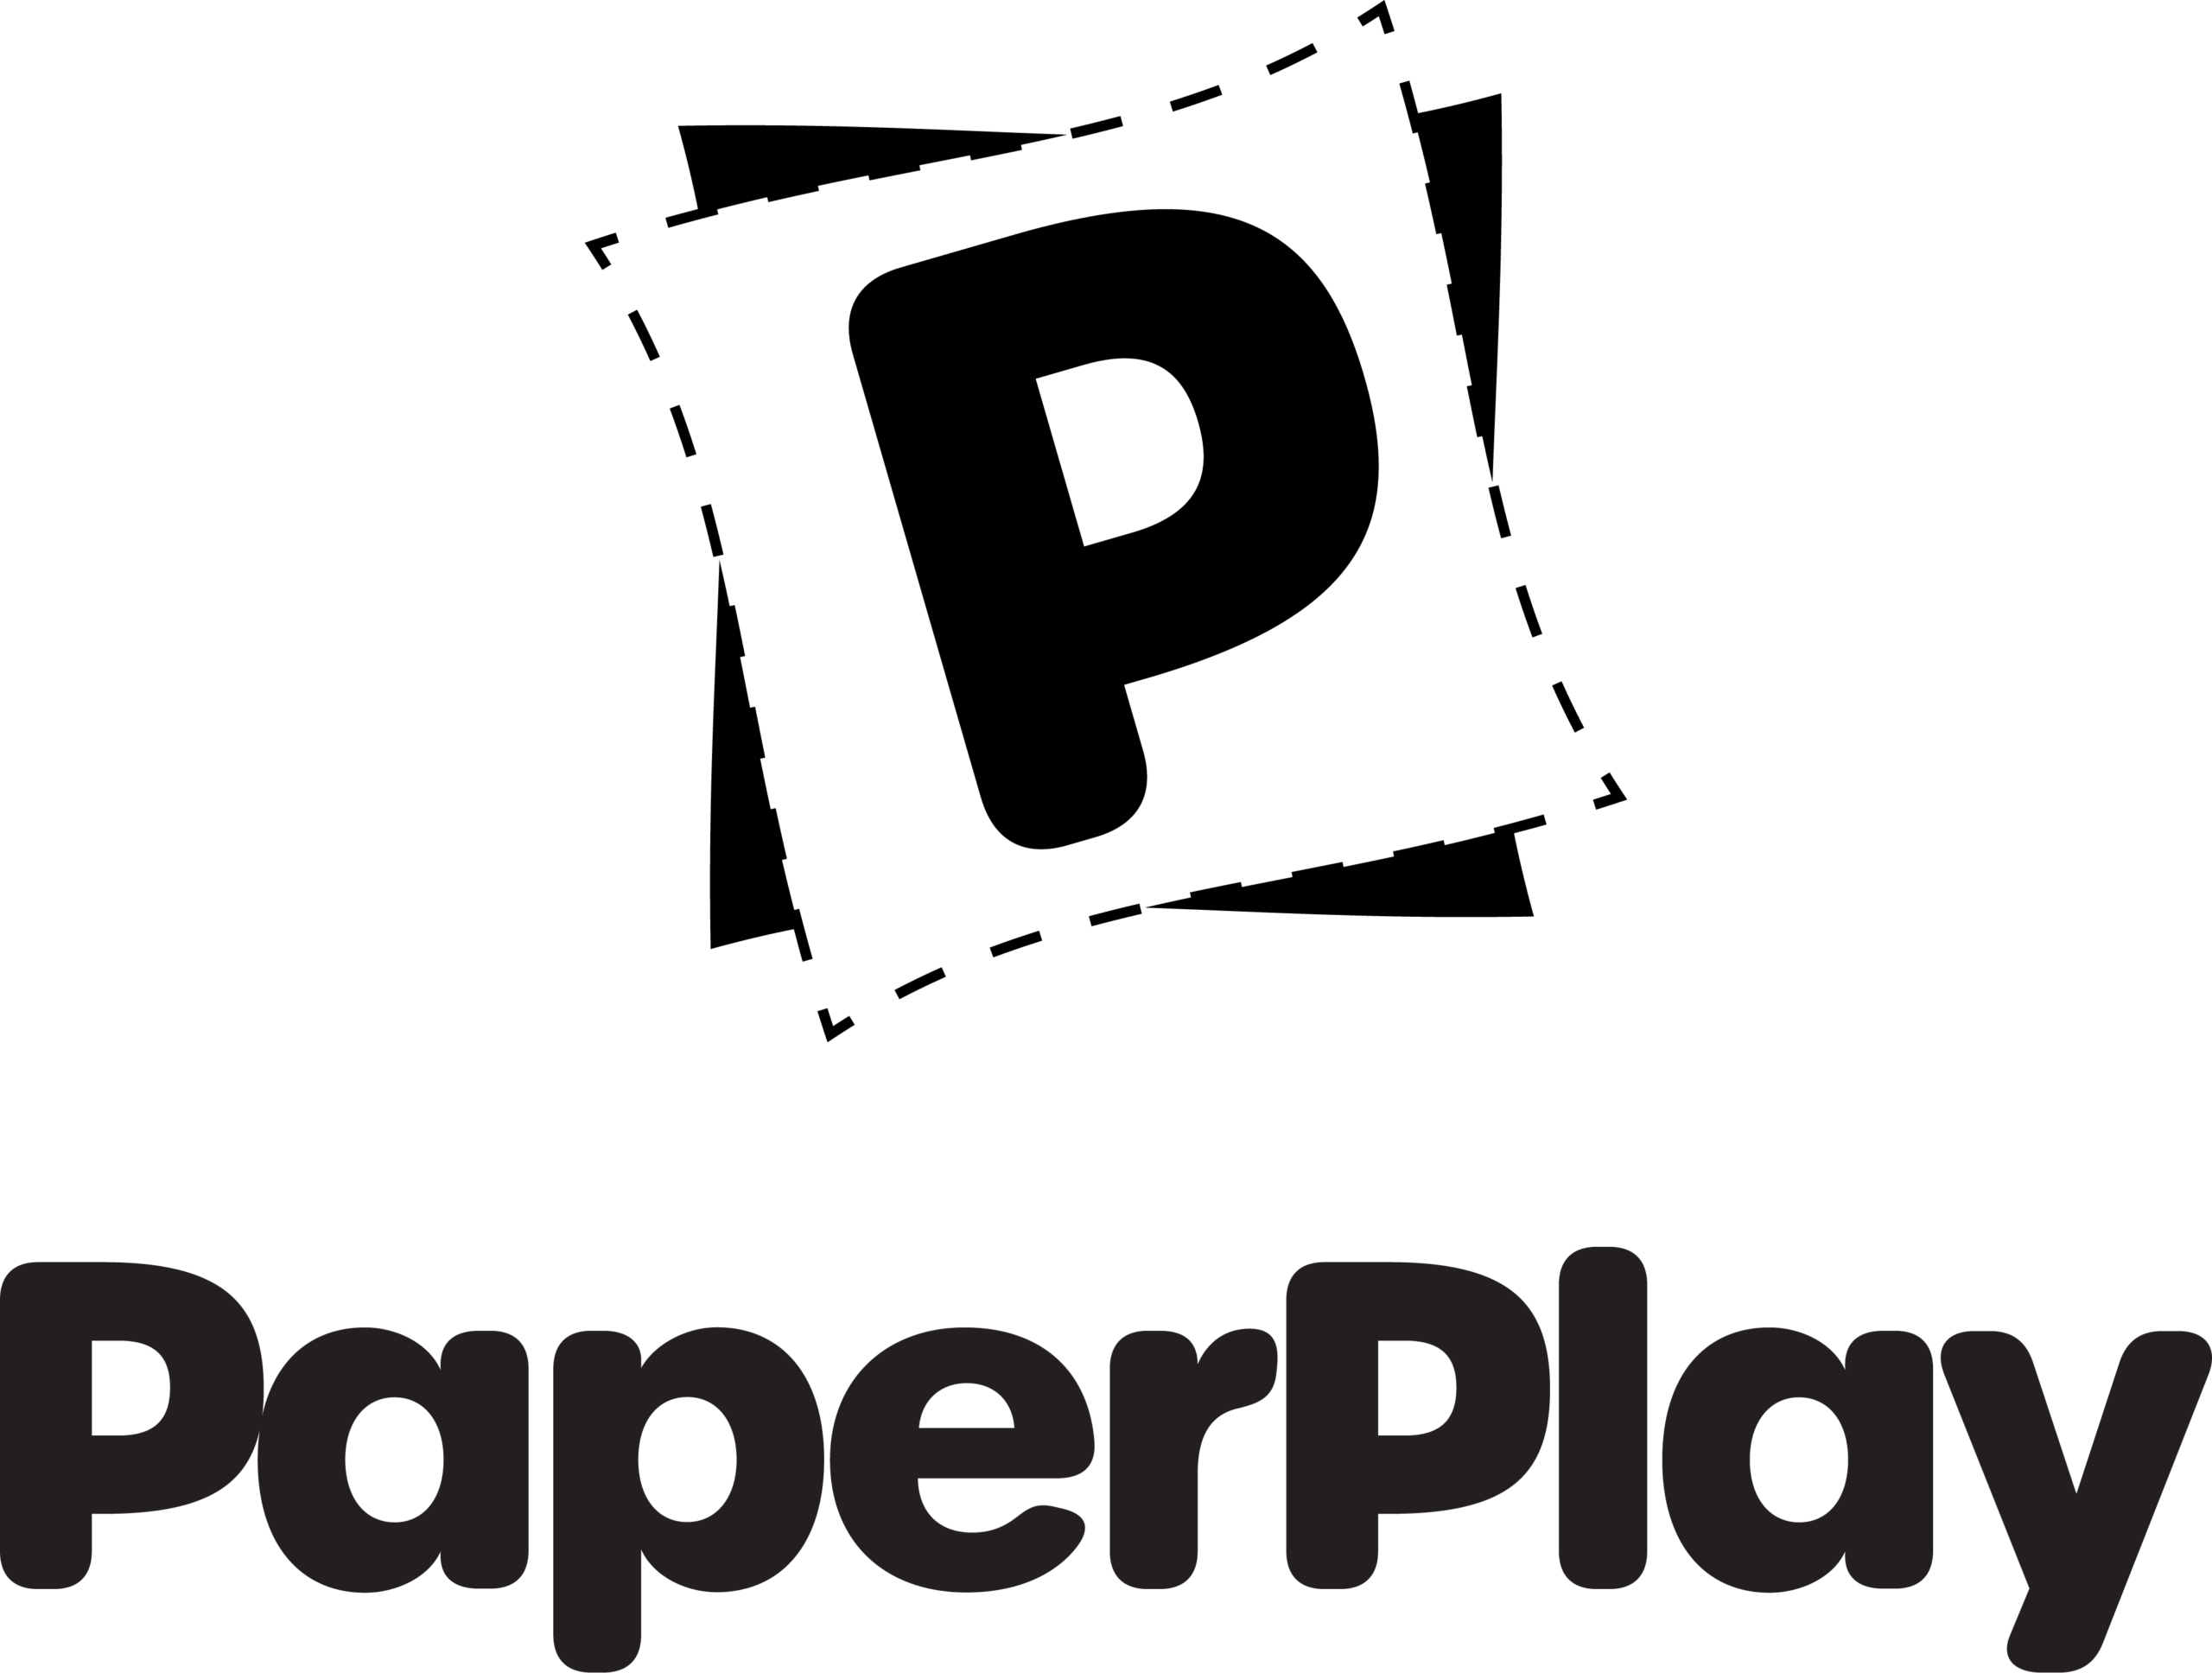 PaperPlay.co